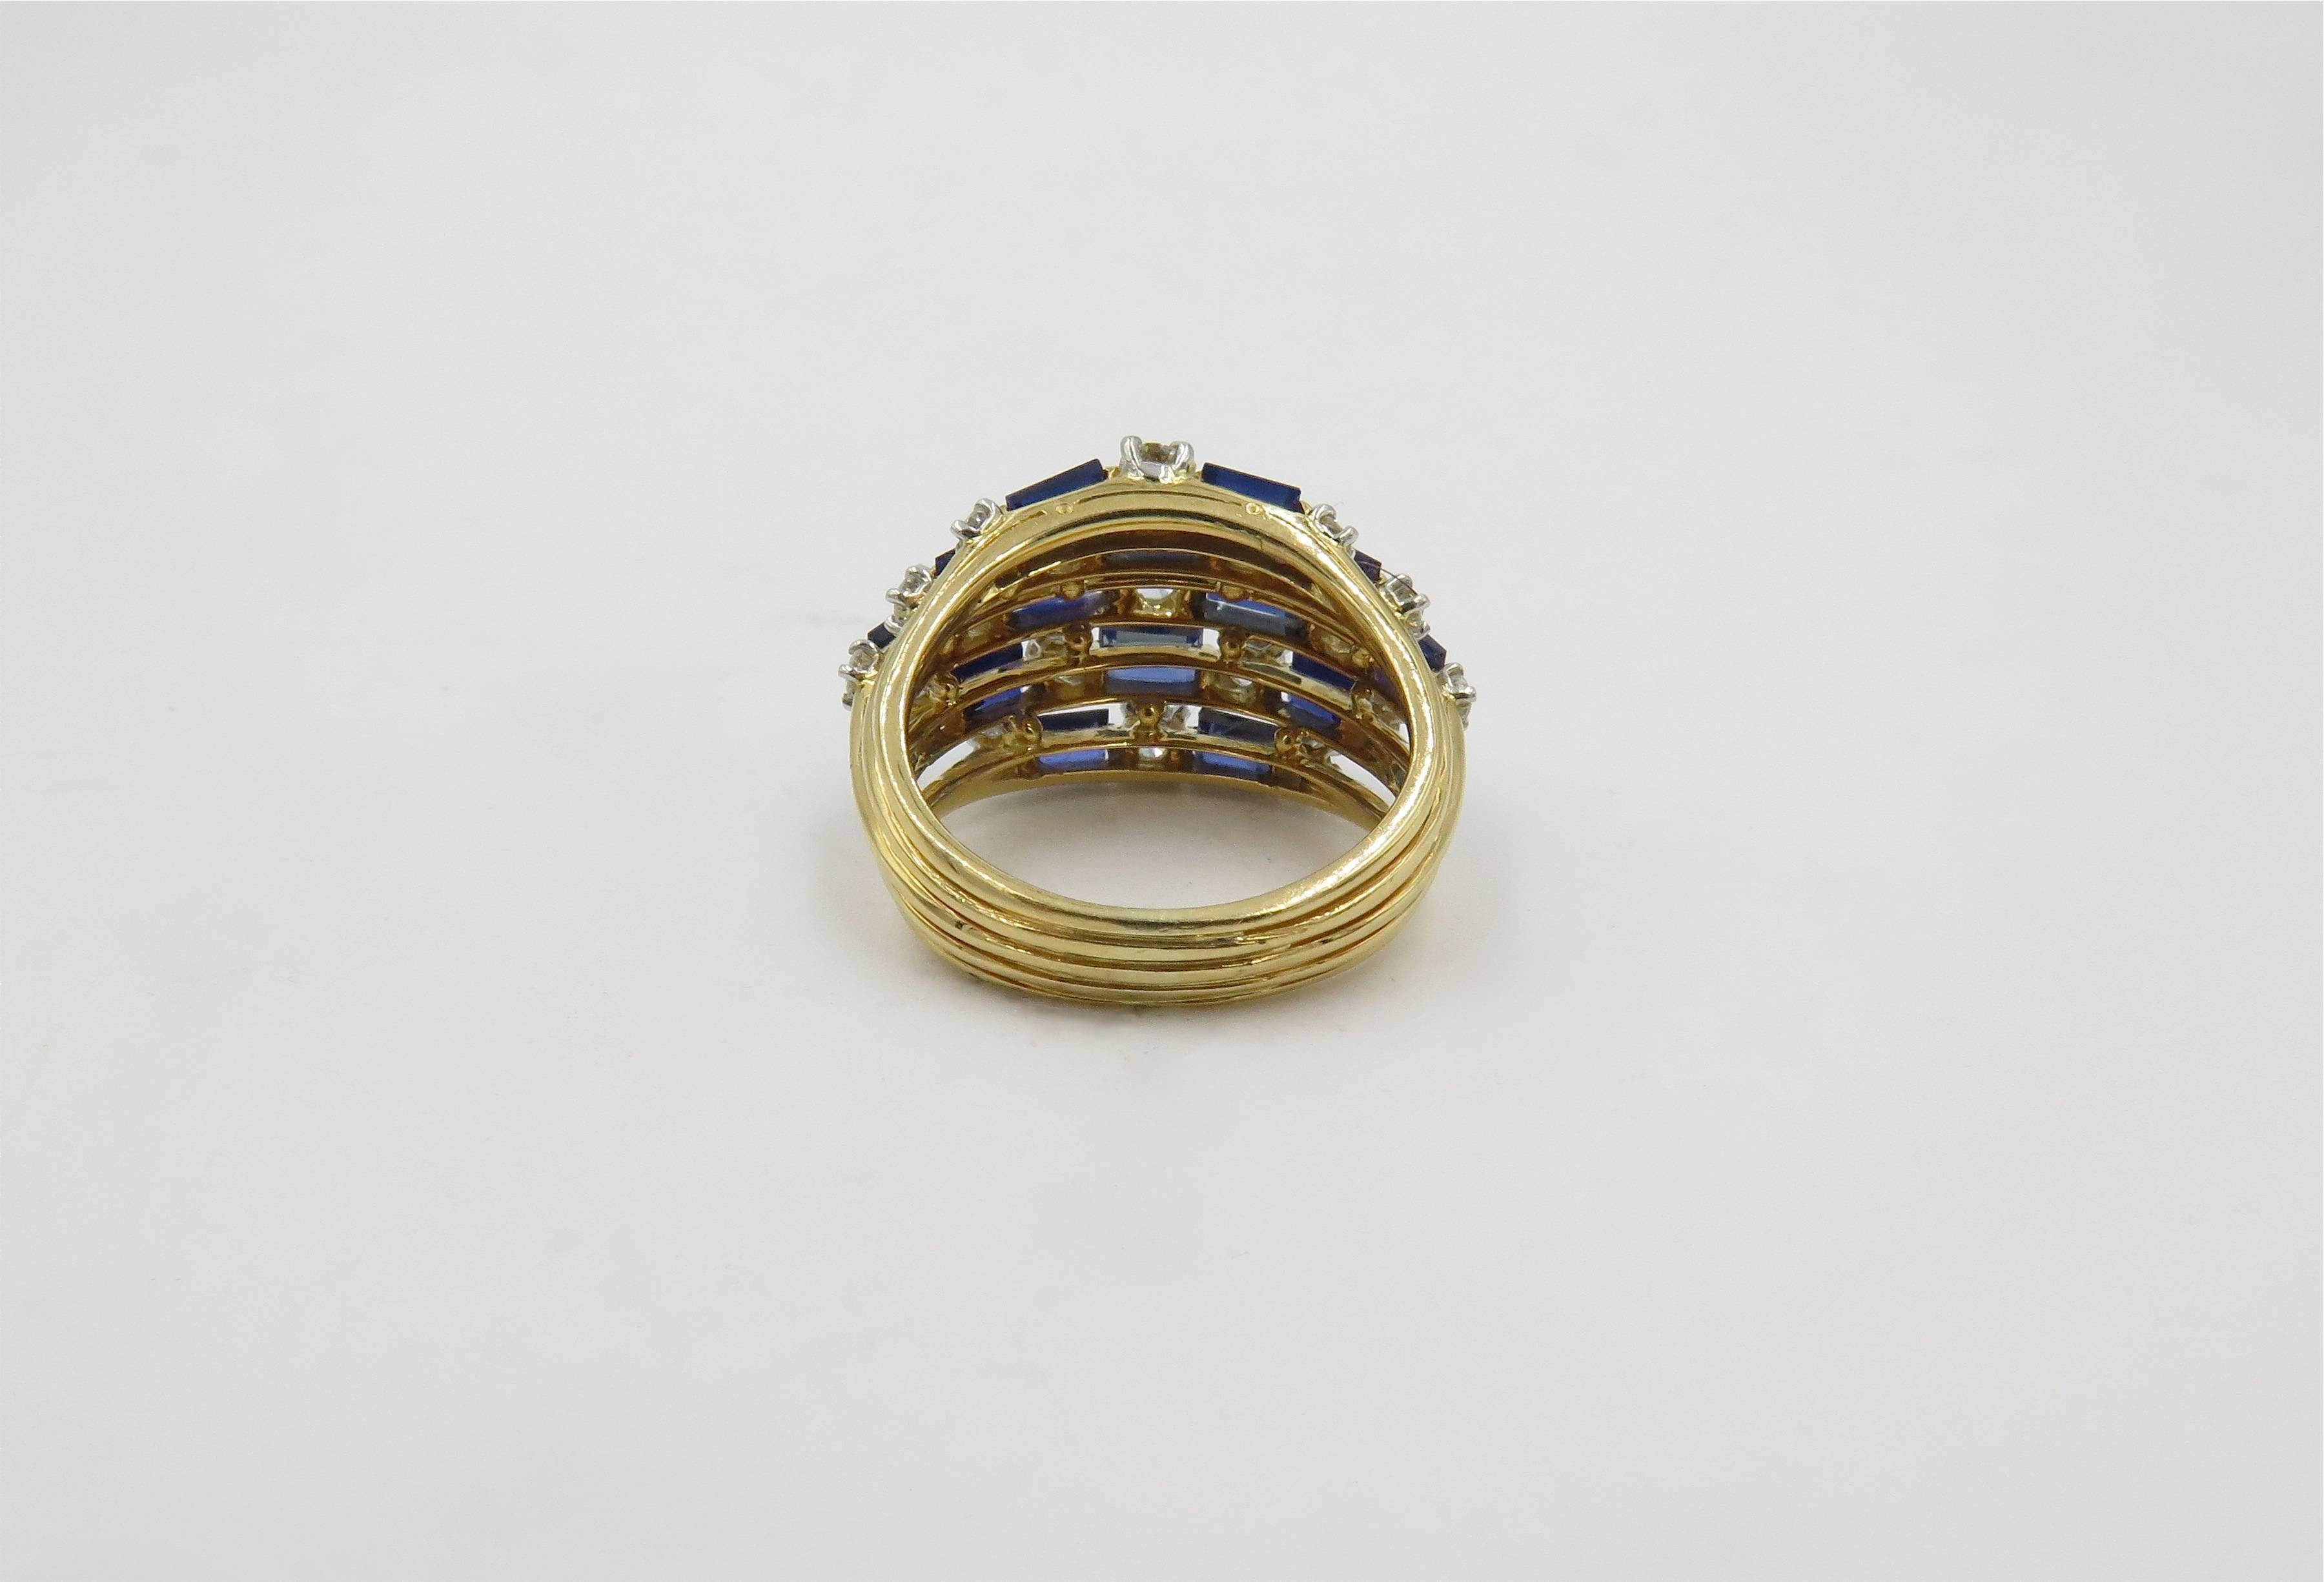 An 18 karat yellow gold, diamond and sapphire ring. Oscar Heyman Brothers. Of openwork bombe design, set with circular cut diamonds and baguette cut sapphires set in a brick work pattern. Nineteen (19) diamonds weigh approximately 1.60 carats,